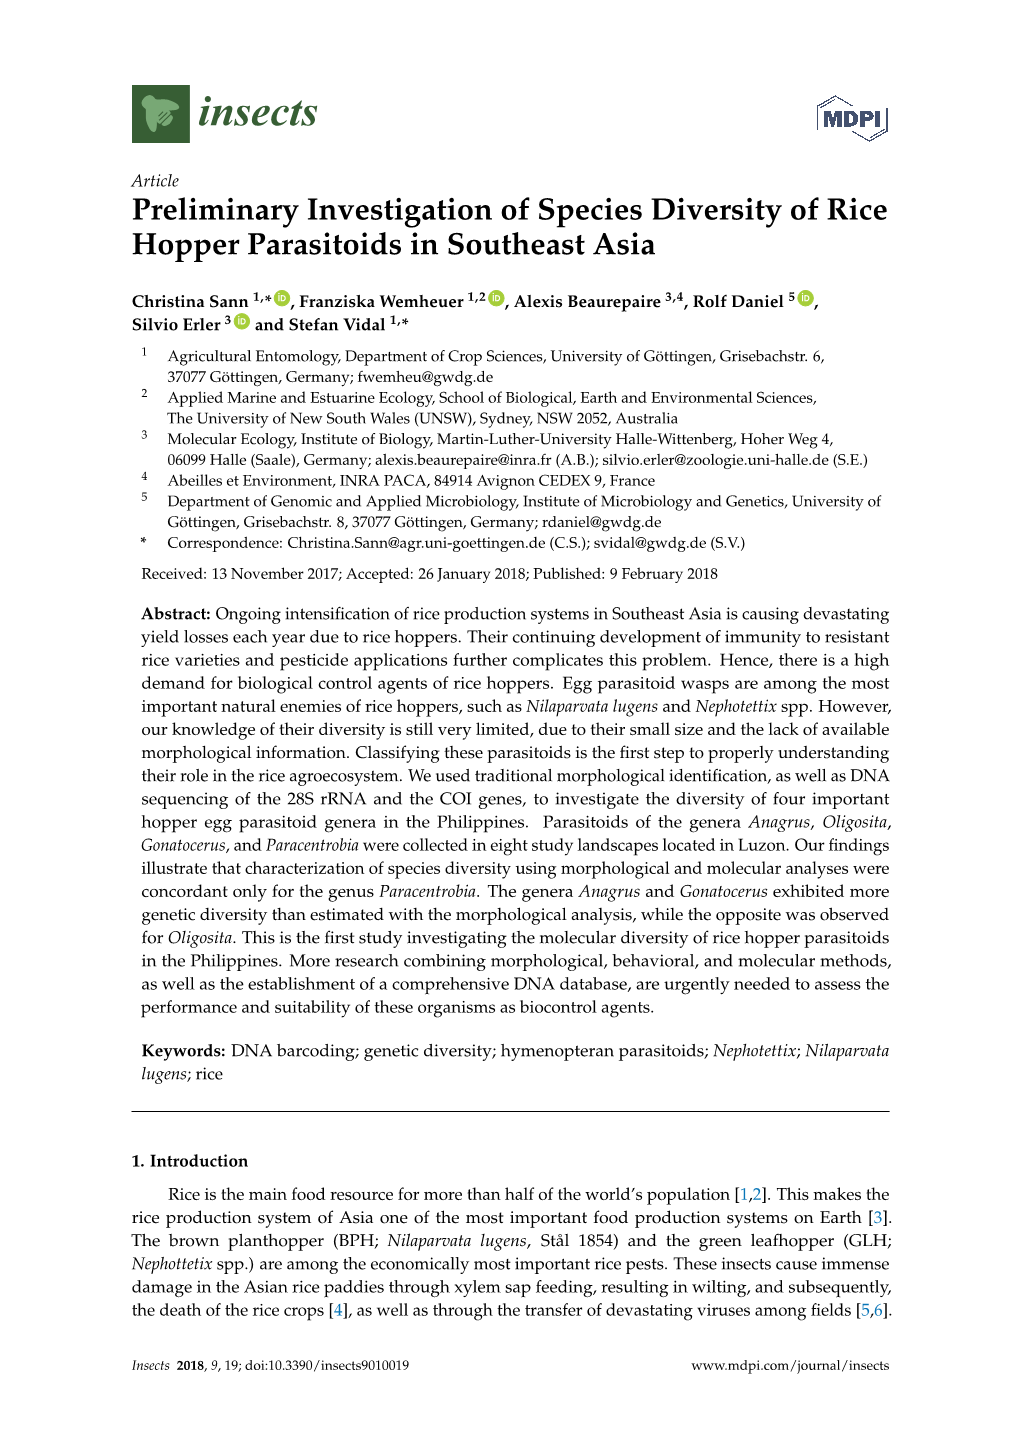 Preliminary Investigation of Species Diversity of Rice Hopper Parasitoids in Southeast Asia